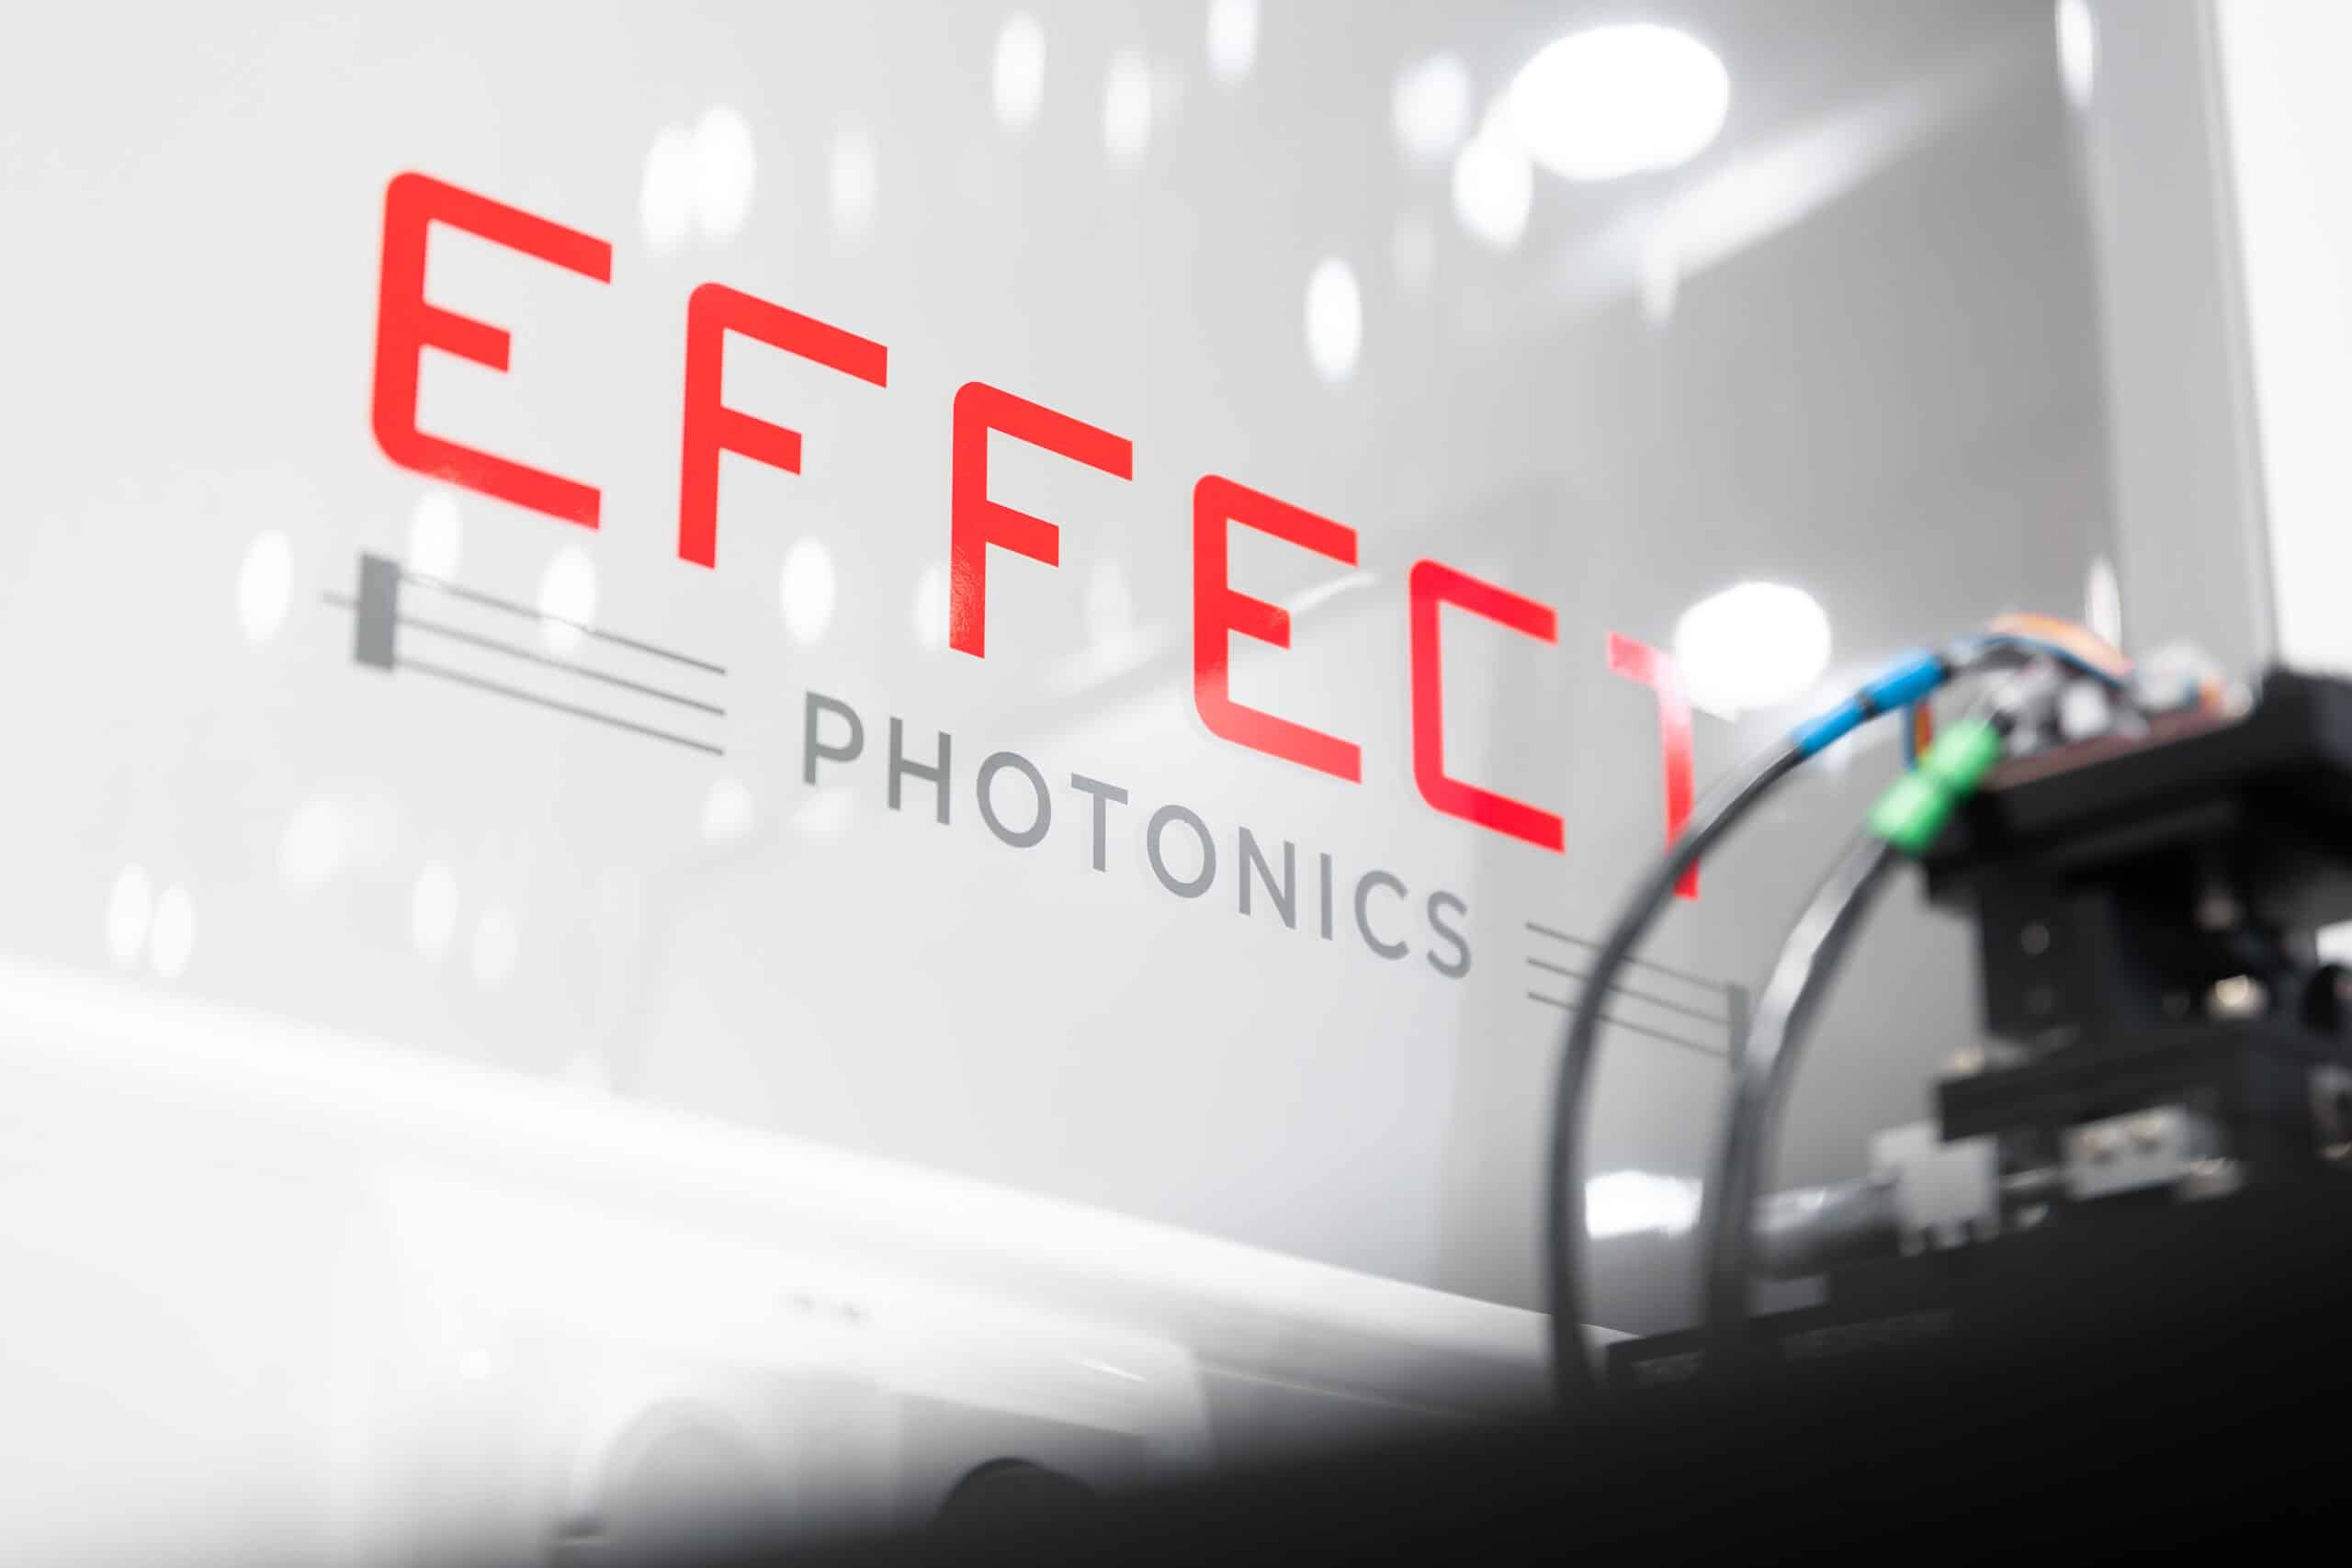 Koene (EFFECT Photonics): "Photonics offers Eindhoven and the Netherlands great opportunities"